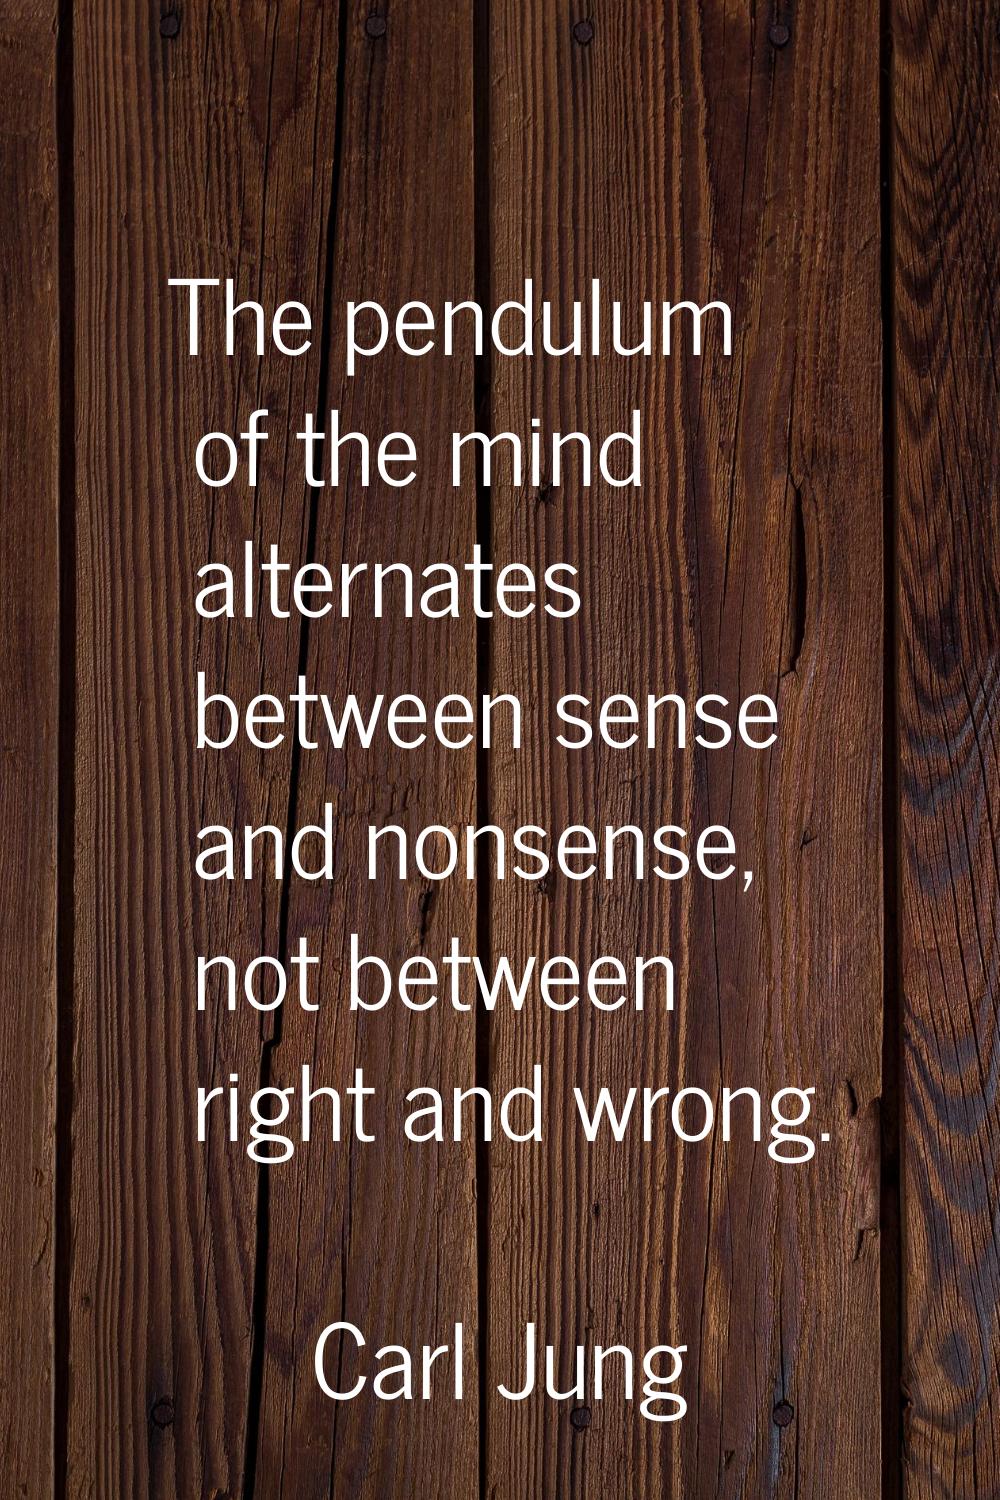 The pendulum of the mind alternates between sense and nonsense, not between right and wrong.